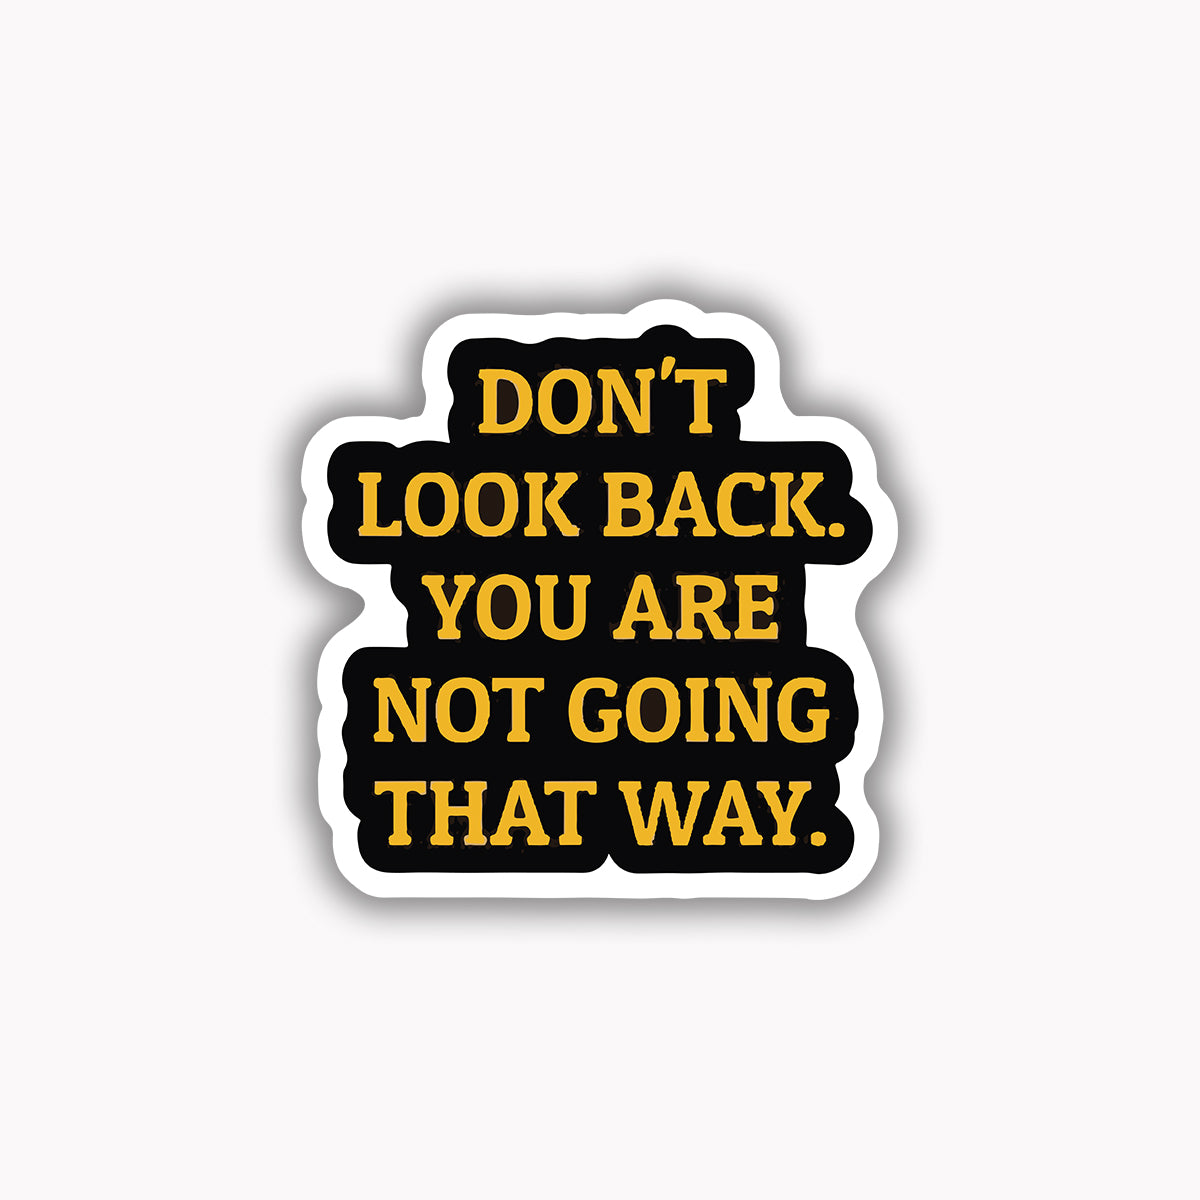 Don't look back you are not going that way